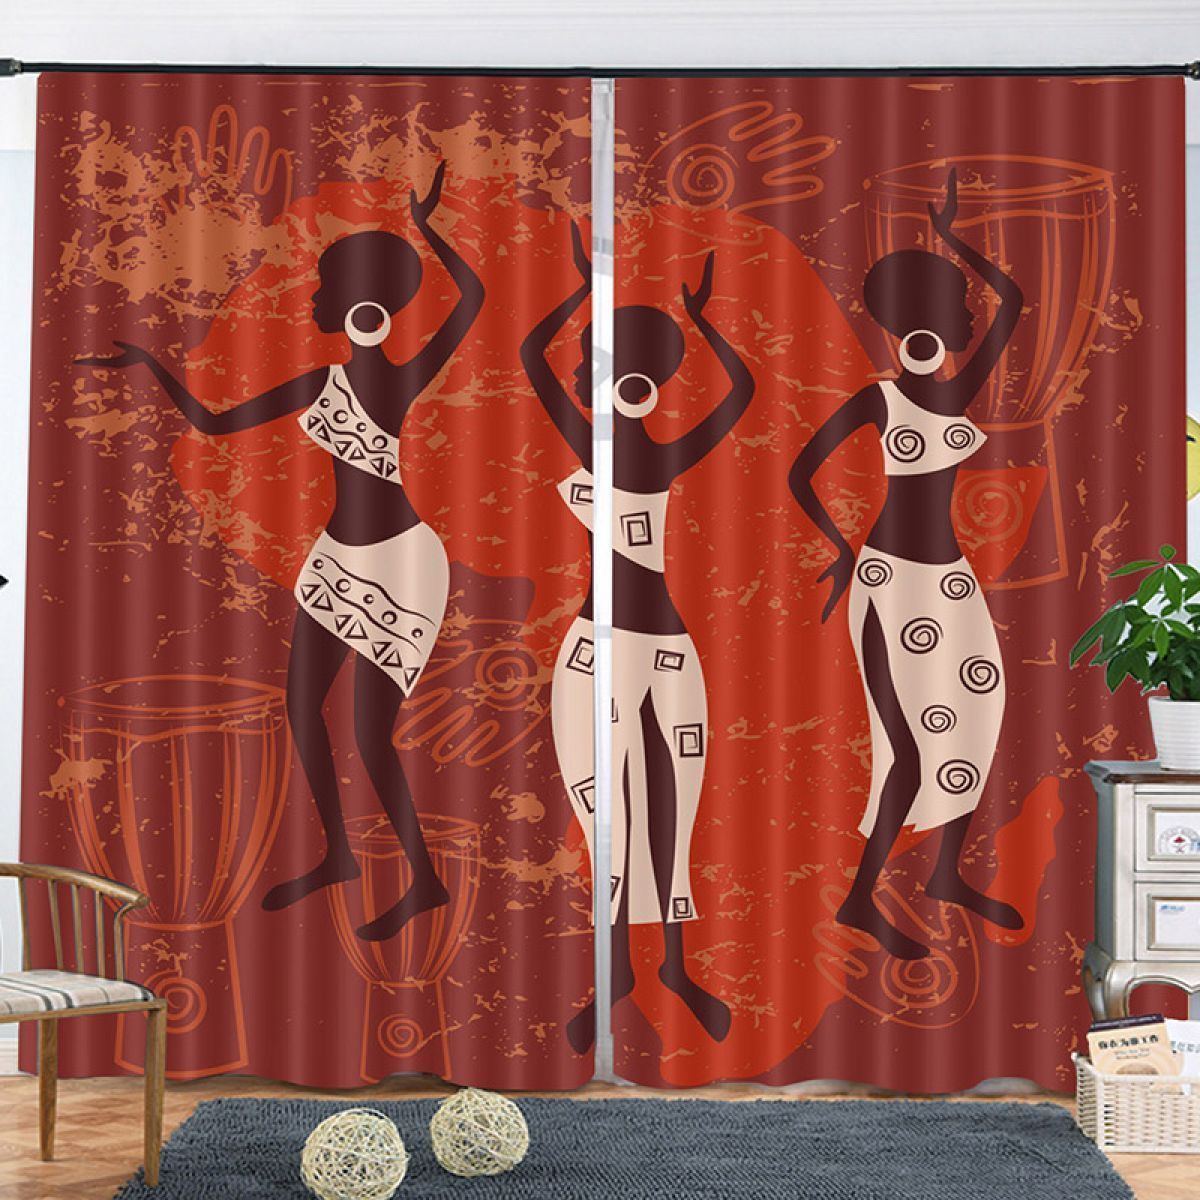 Red African Dance Printed Window Curtain Home Decor